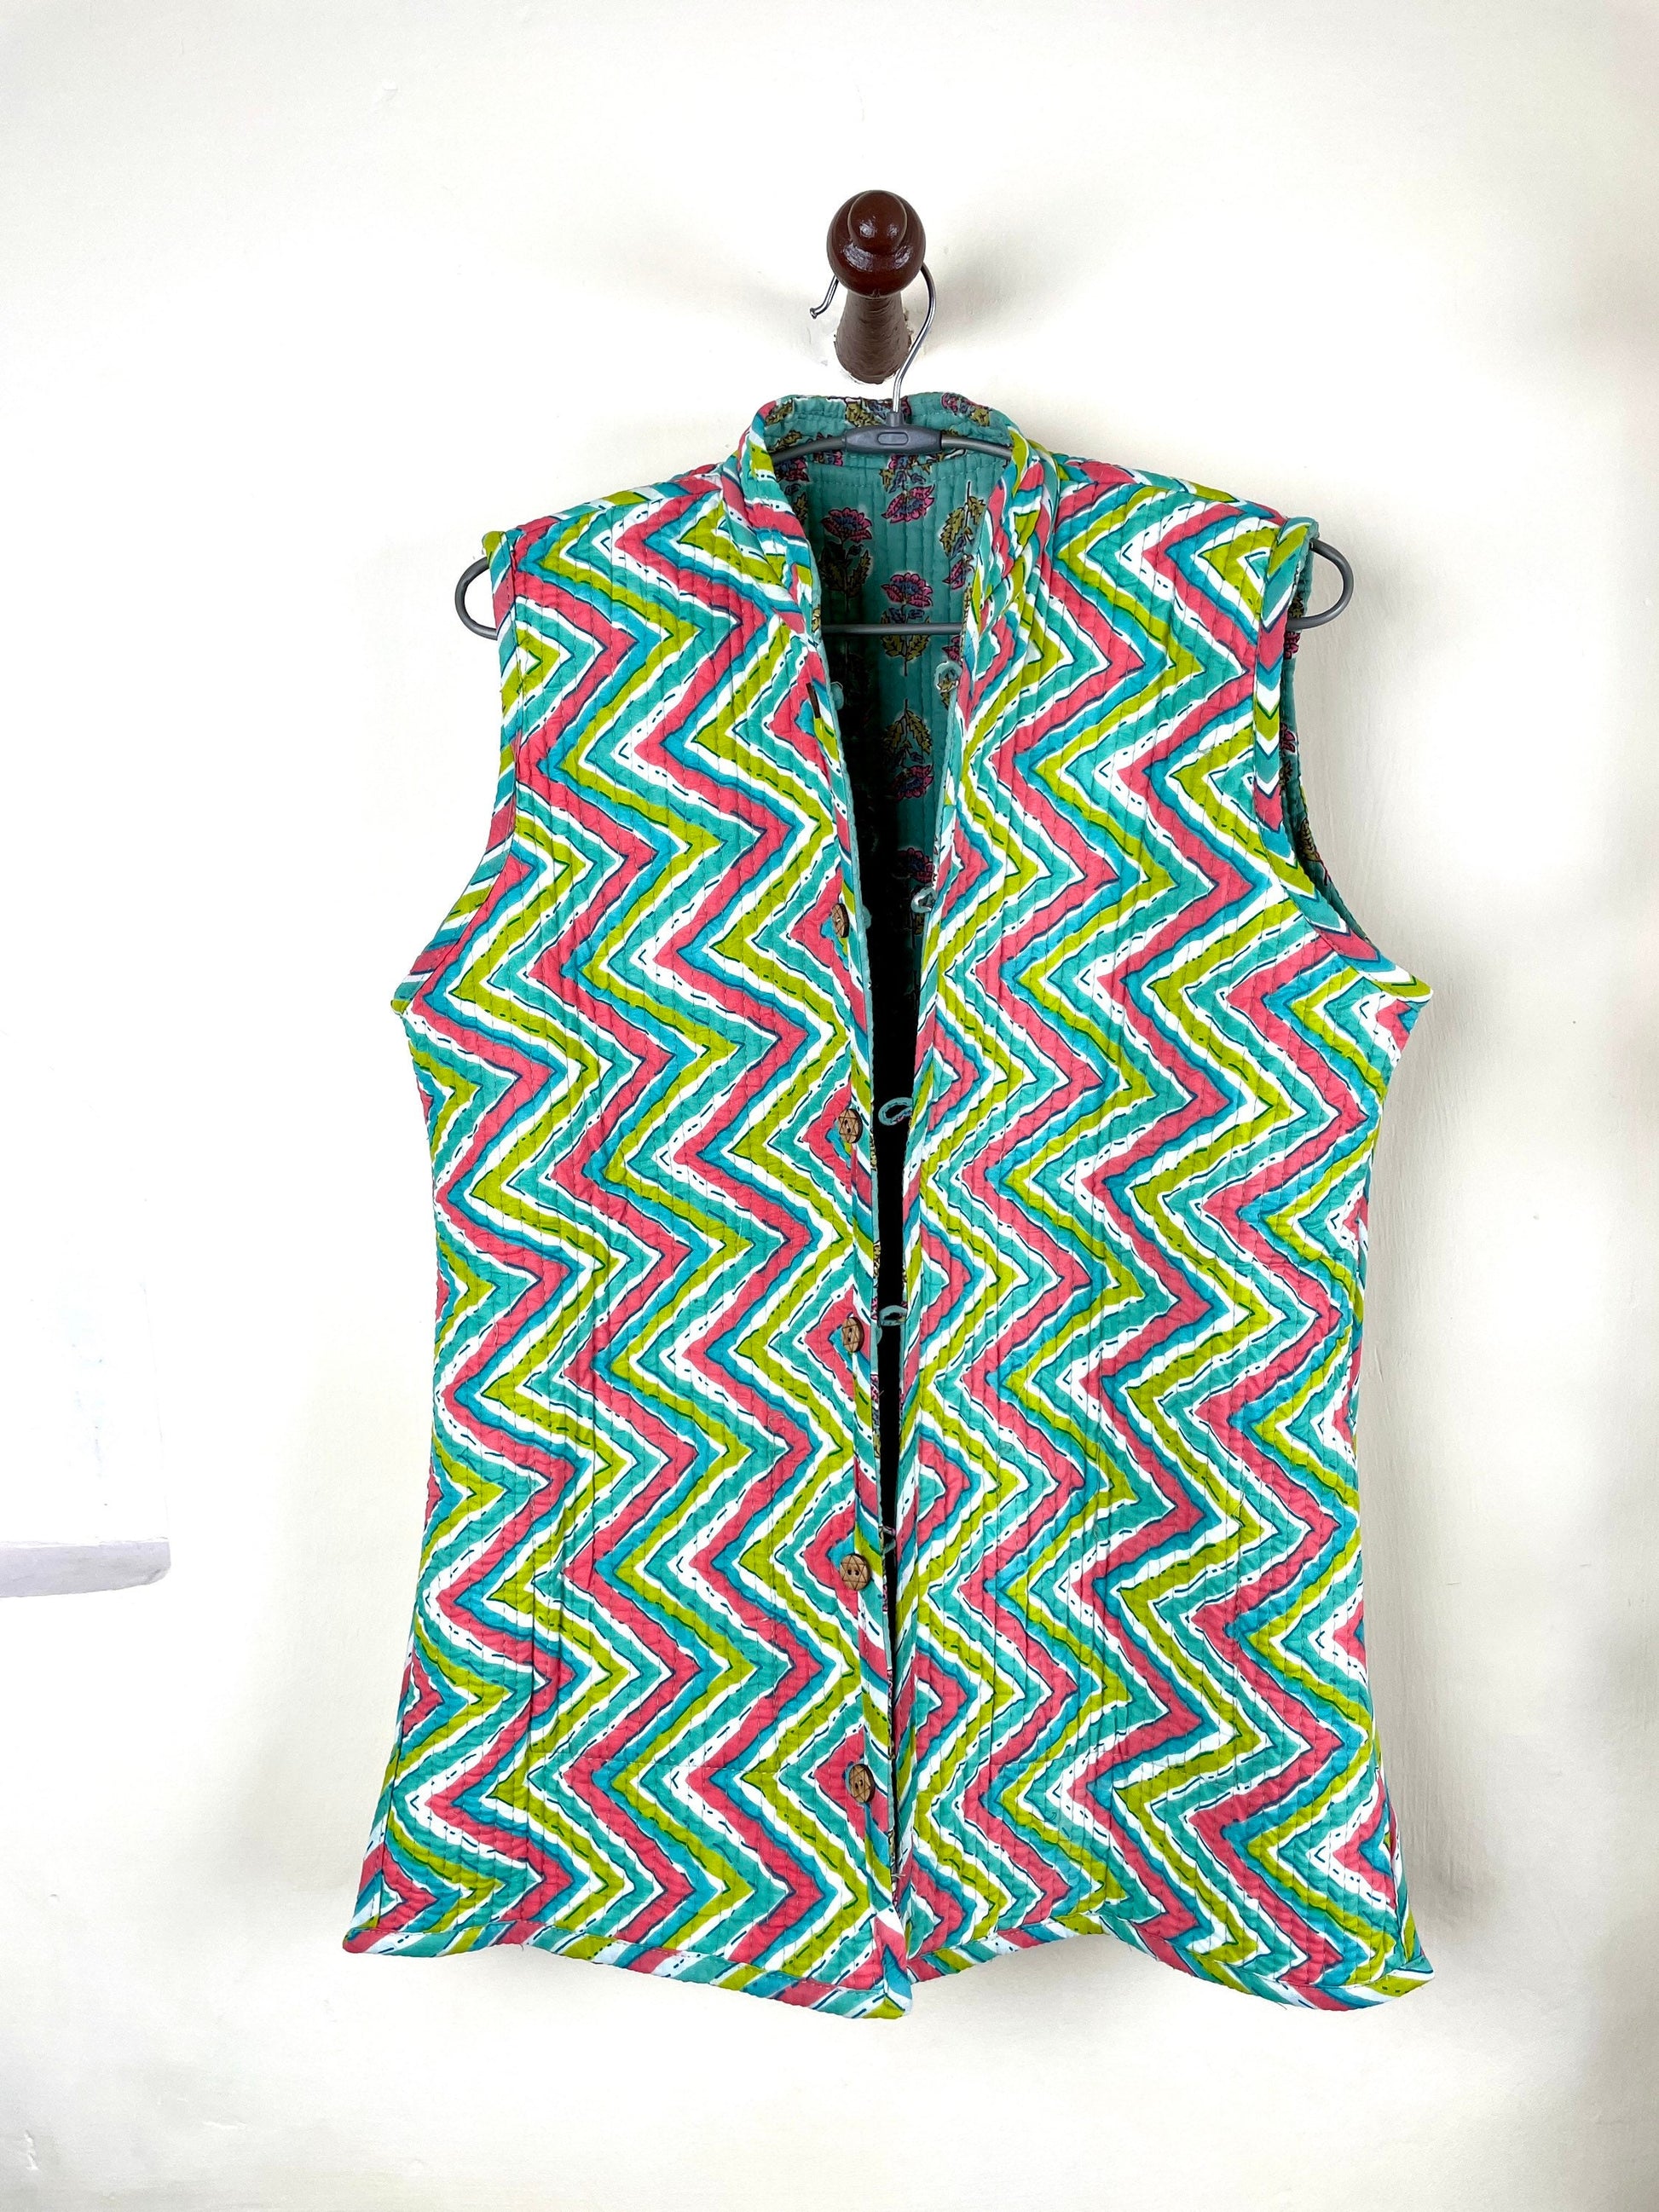 Indian Handmade Quilted Cotton Sleeveless Jacket Blue & Green Stylish Women's Coat, Reversible Jacket for Her